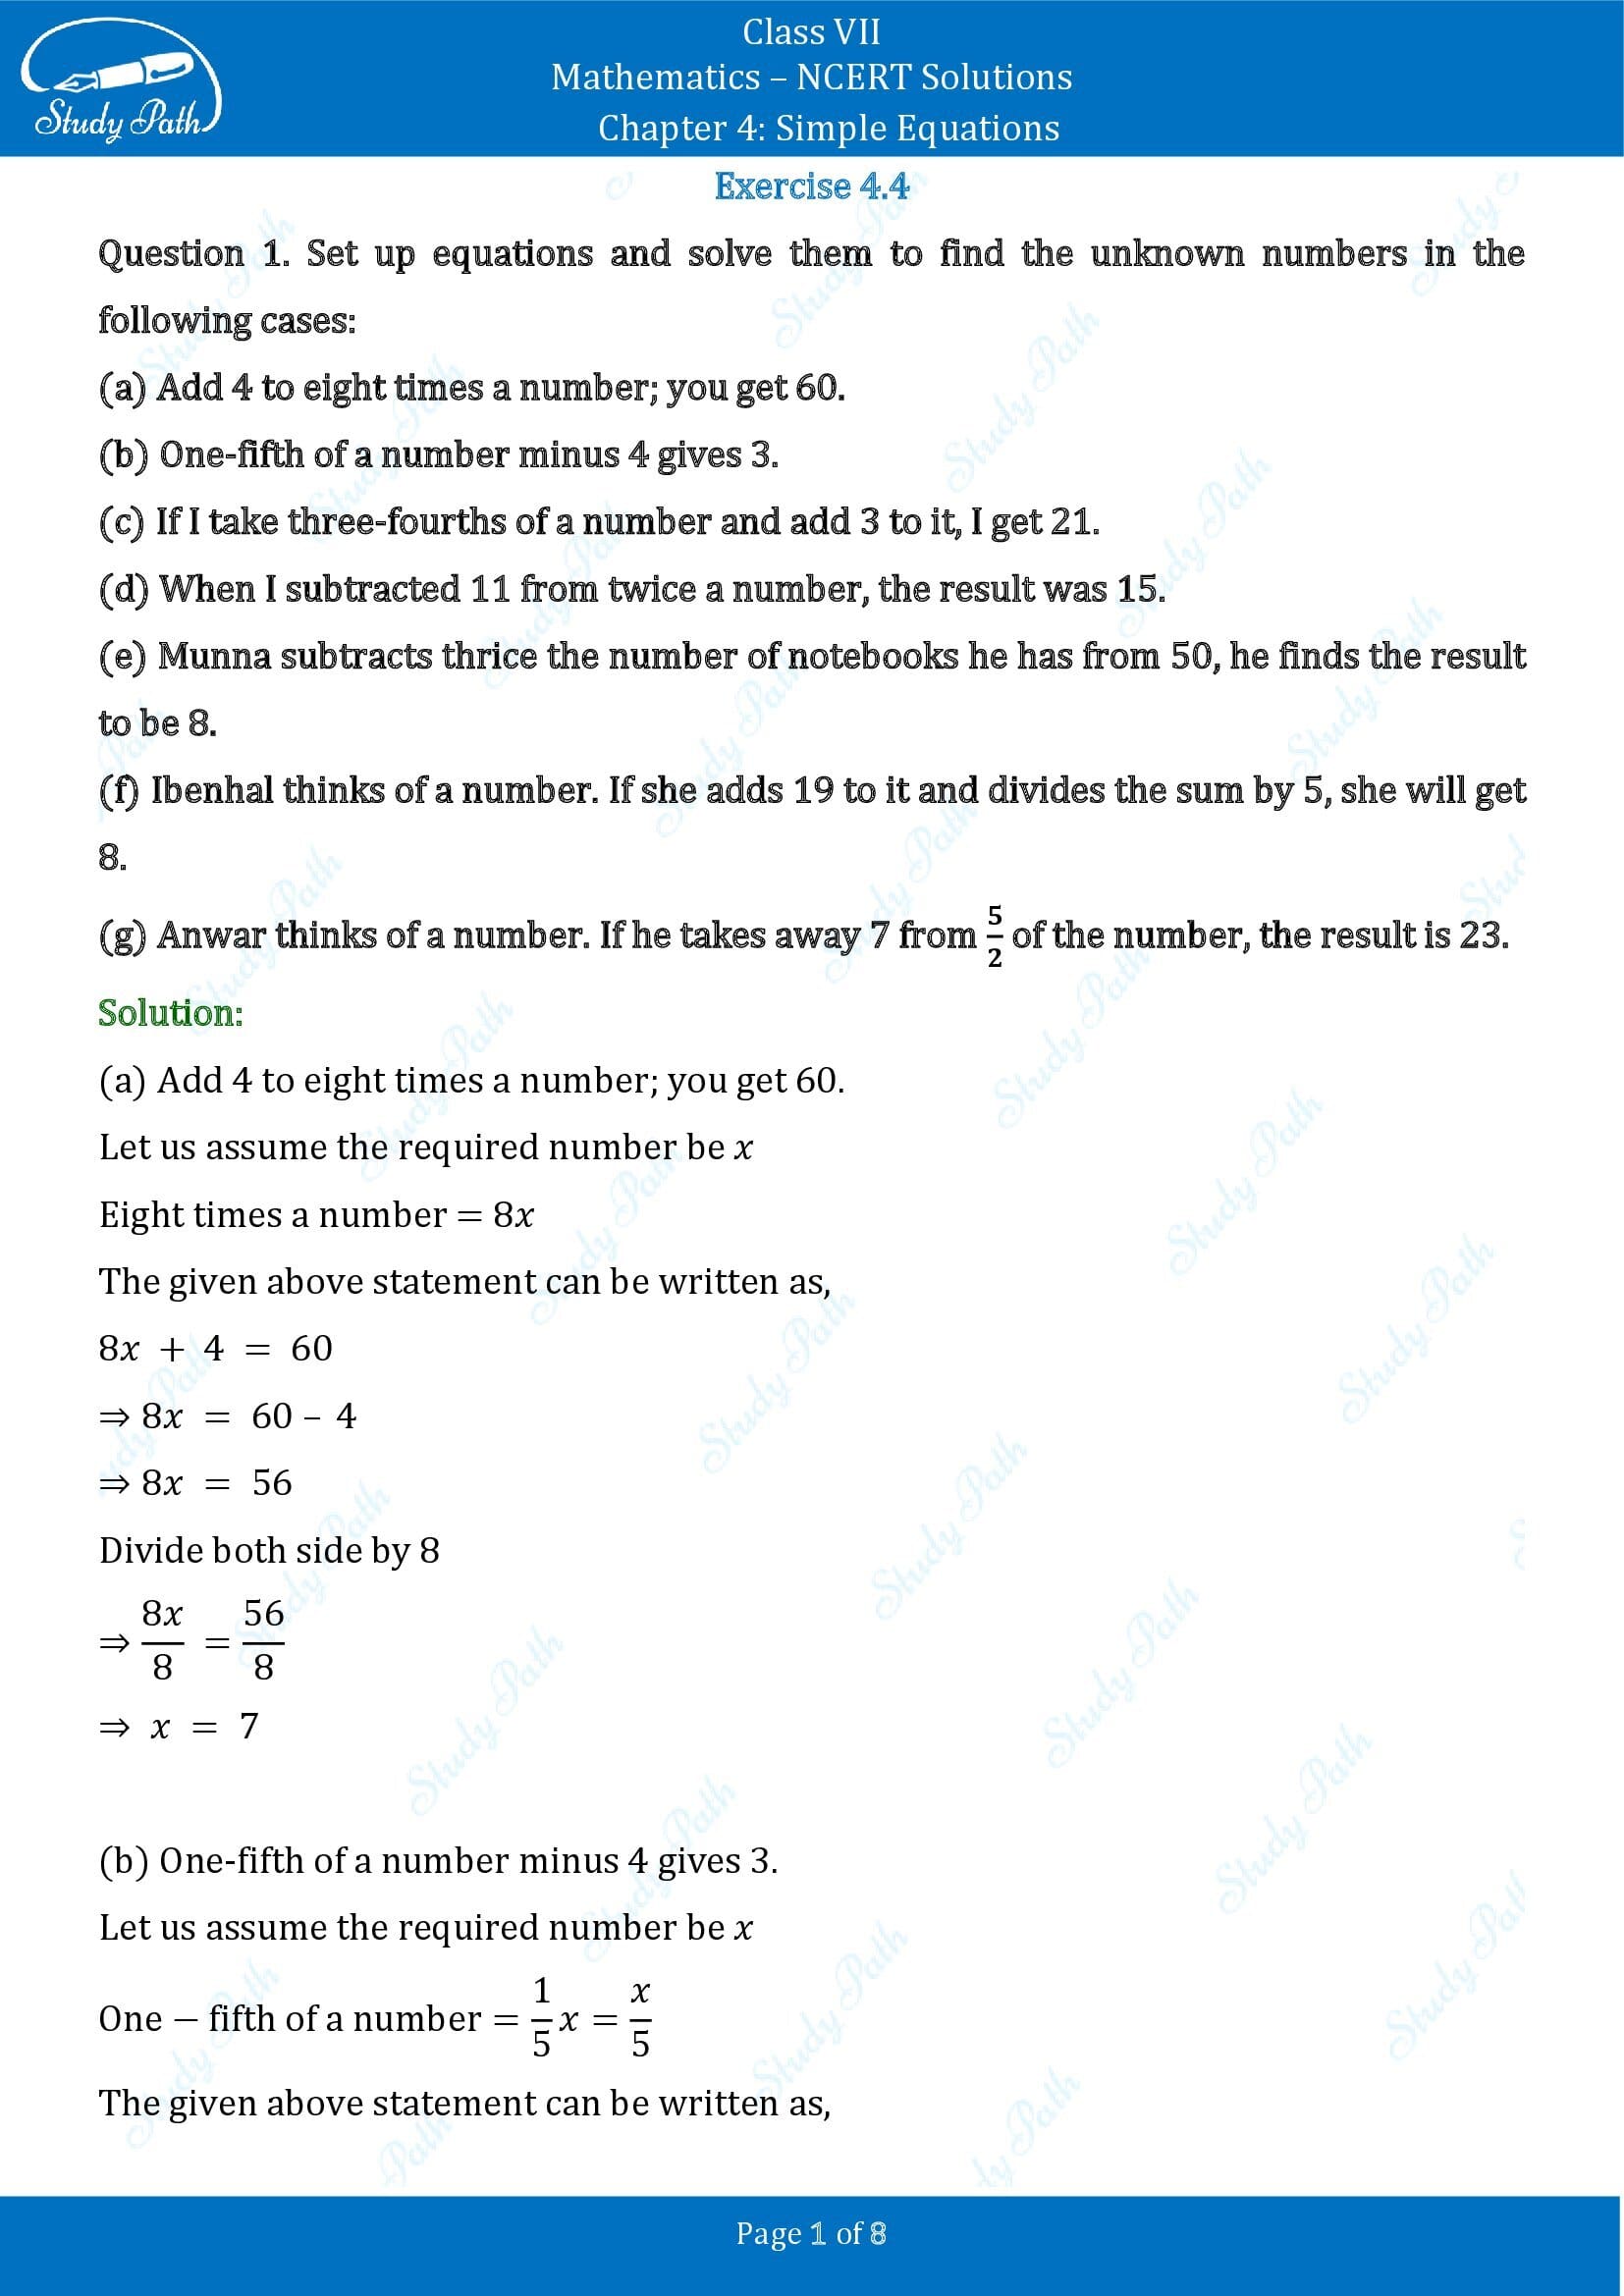 NCERT Solutions for Class 7 Maths Chapter 4 Simple Equations Exercise 4.4 00001